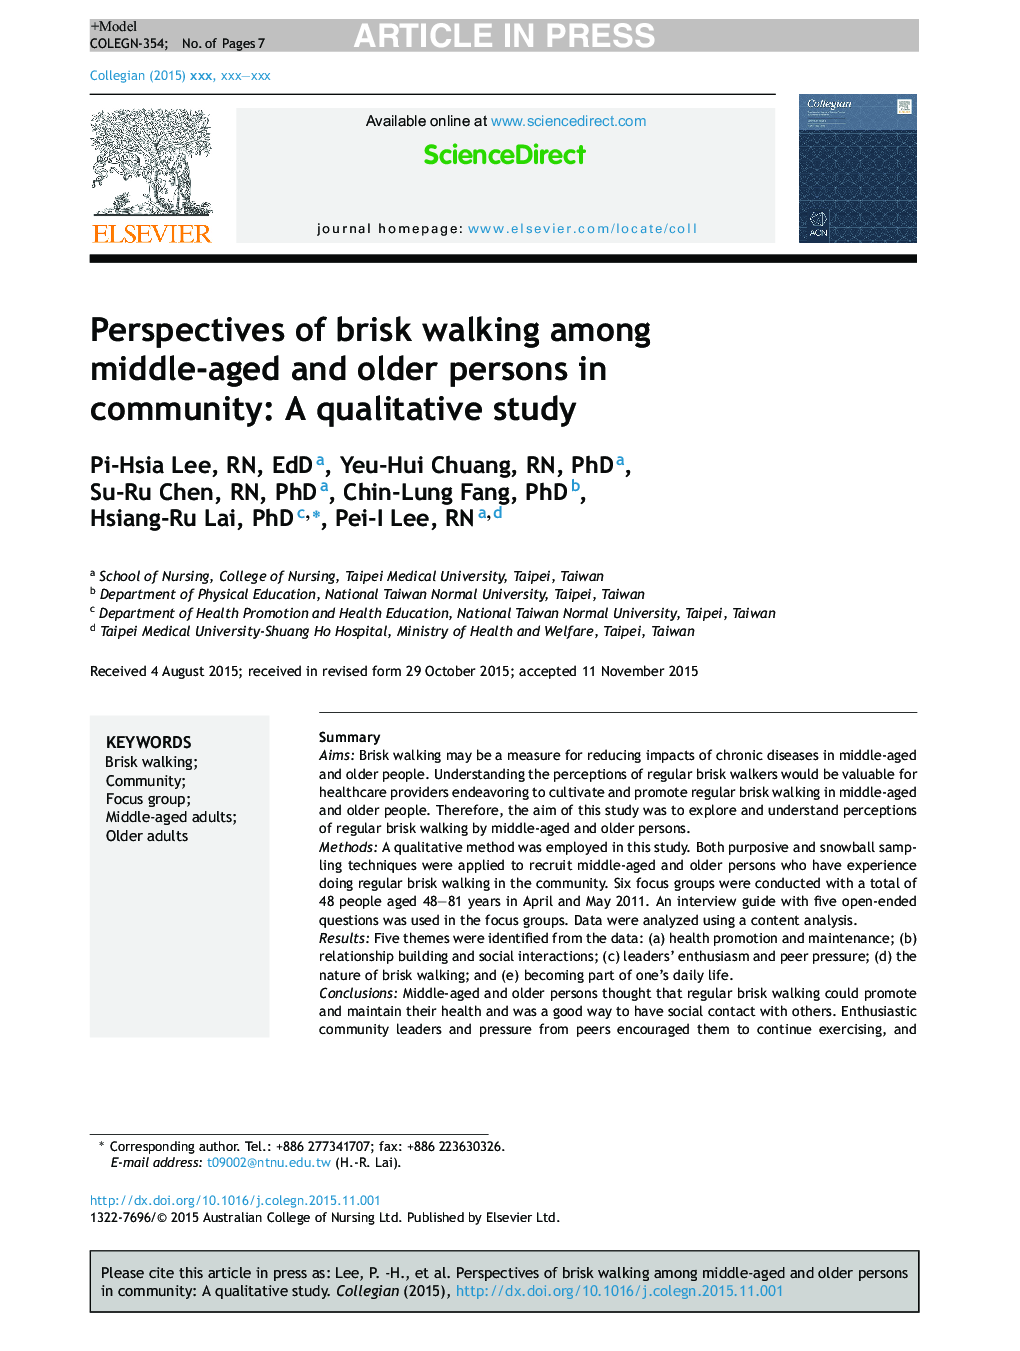 Perspectives of brisk walking among middle-aged and older persons in community: A qualitative study